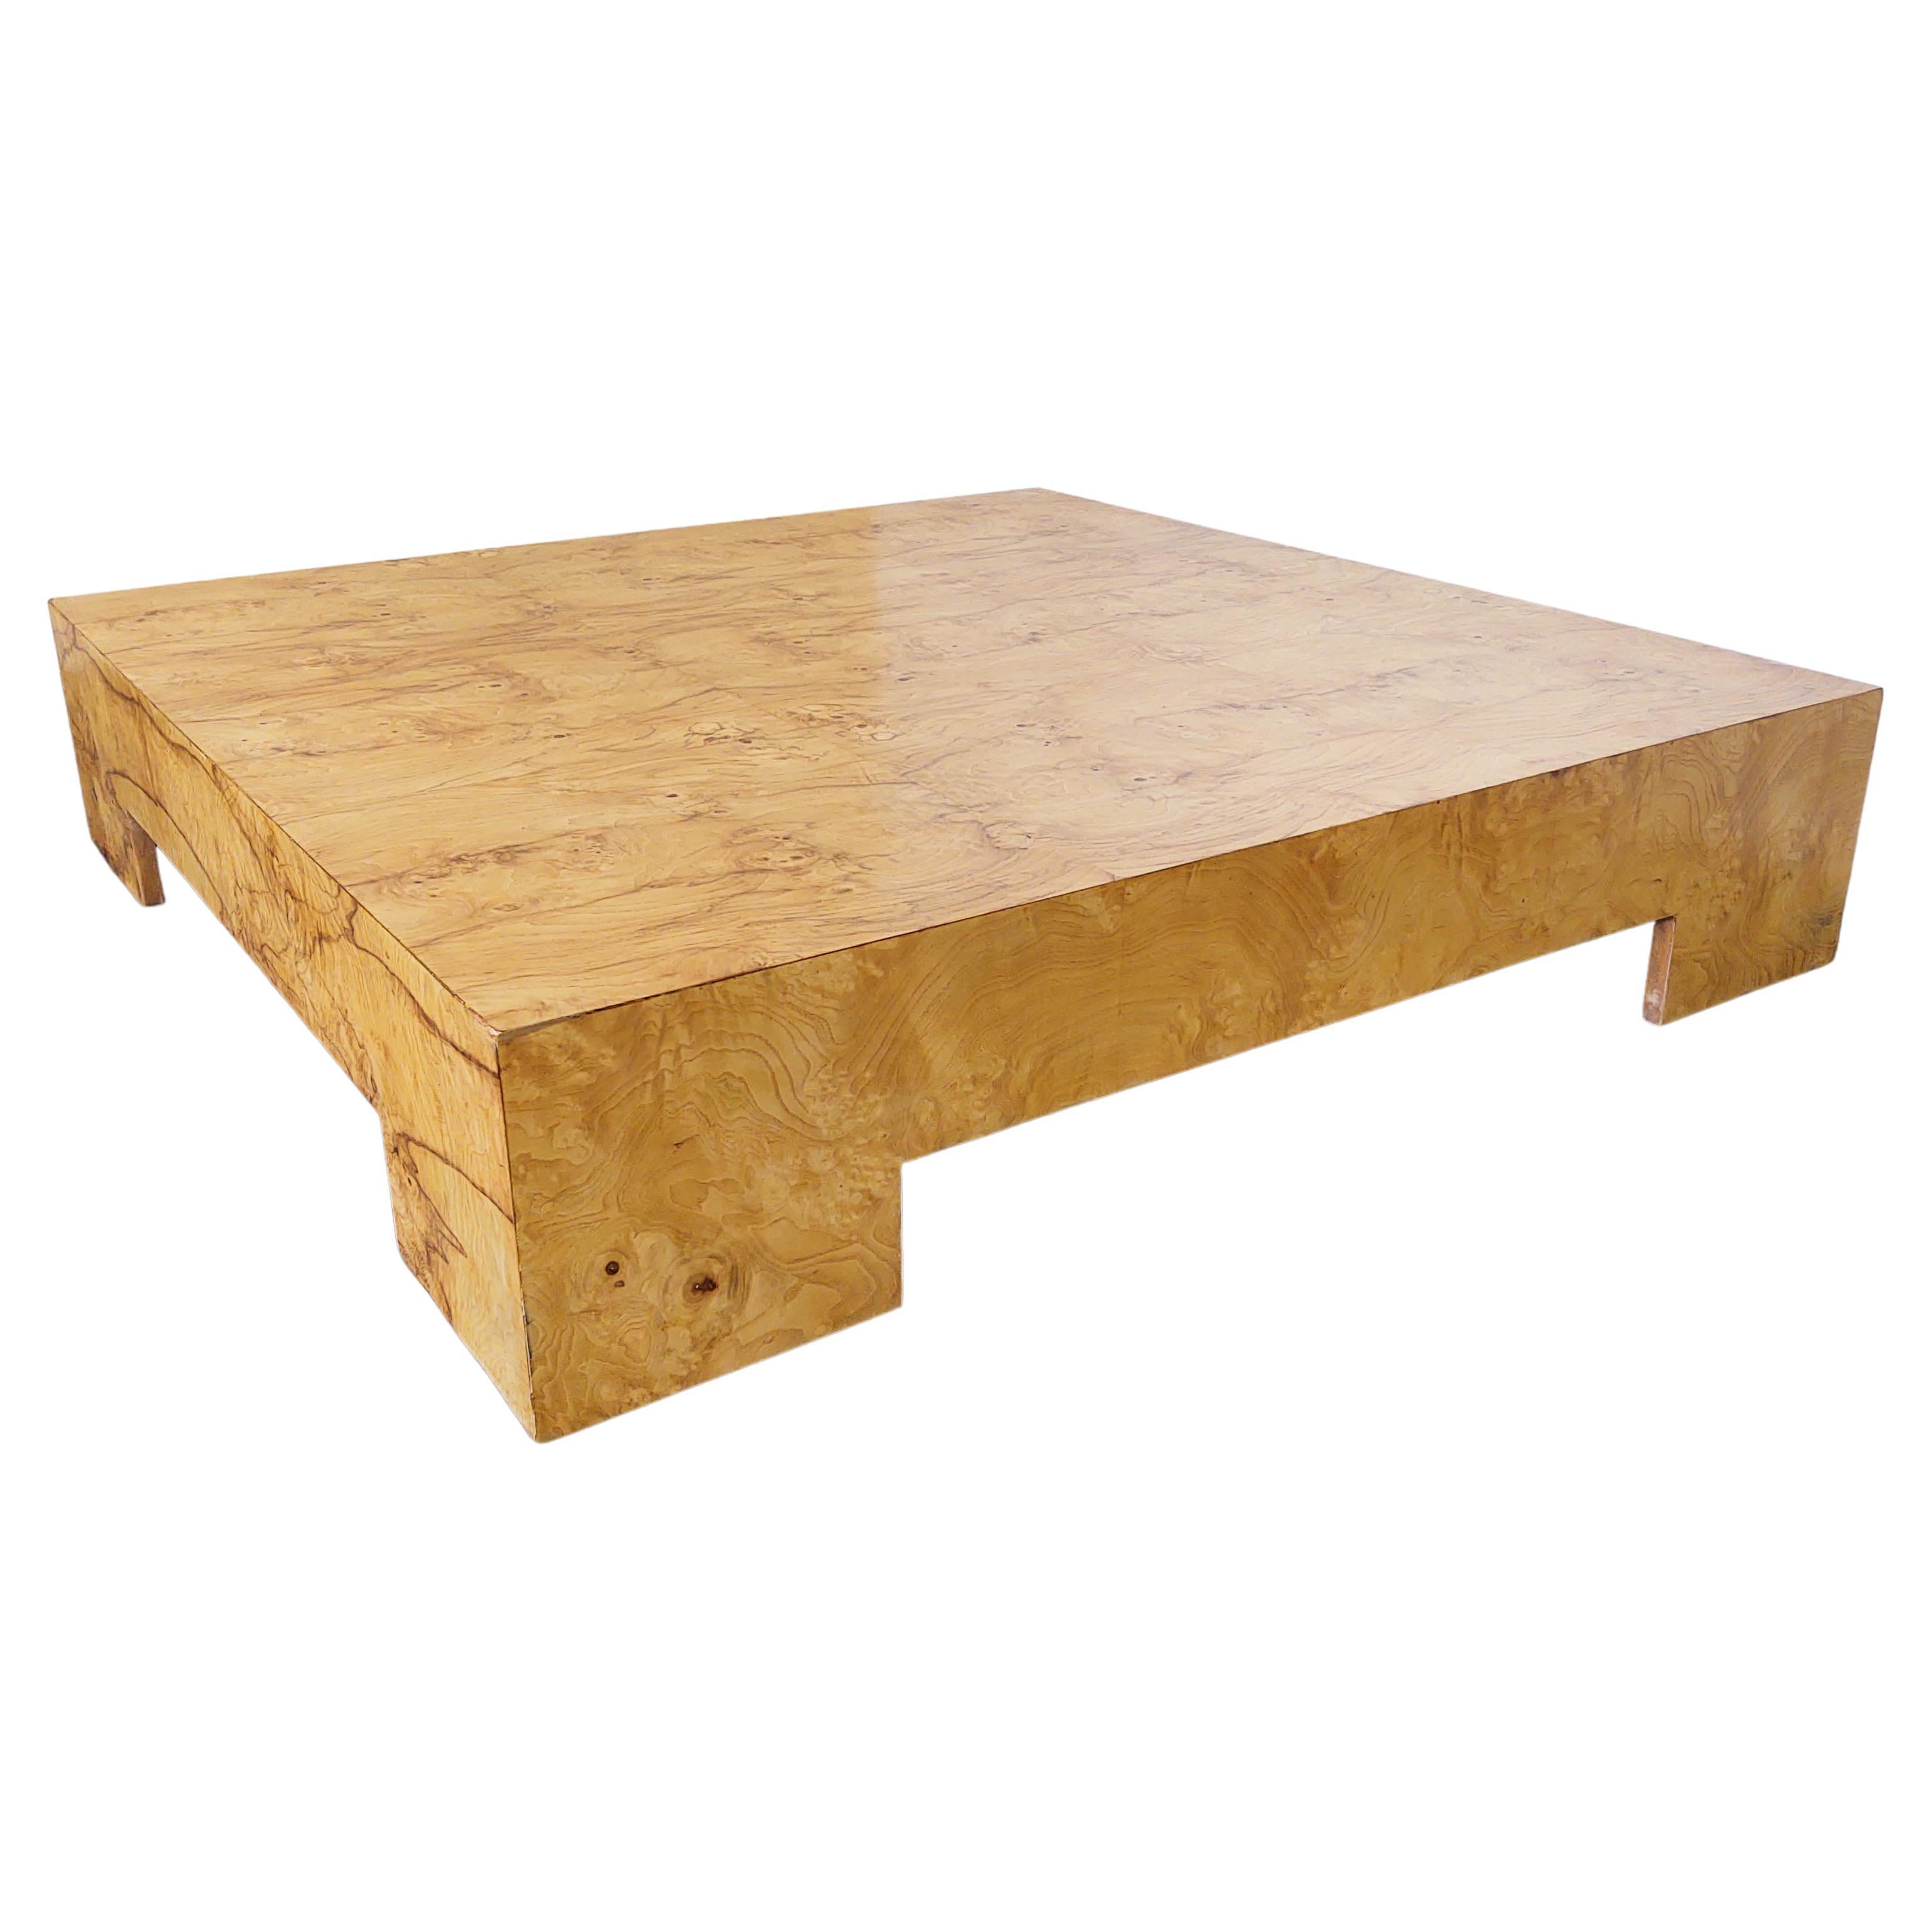 Olive Burl Low Profile Coffee Table by Milo Baughman